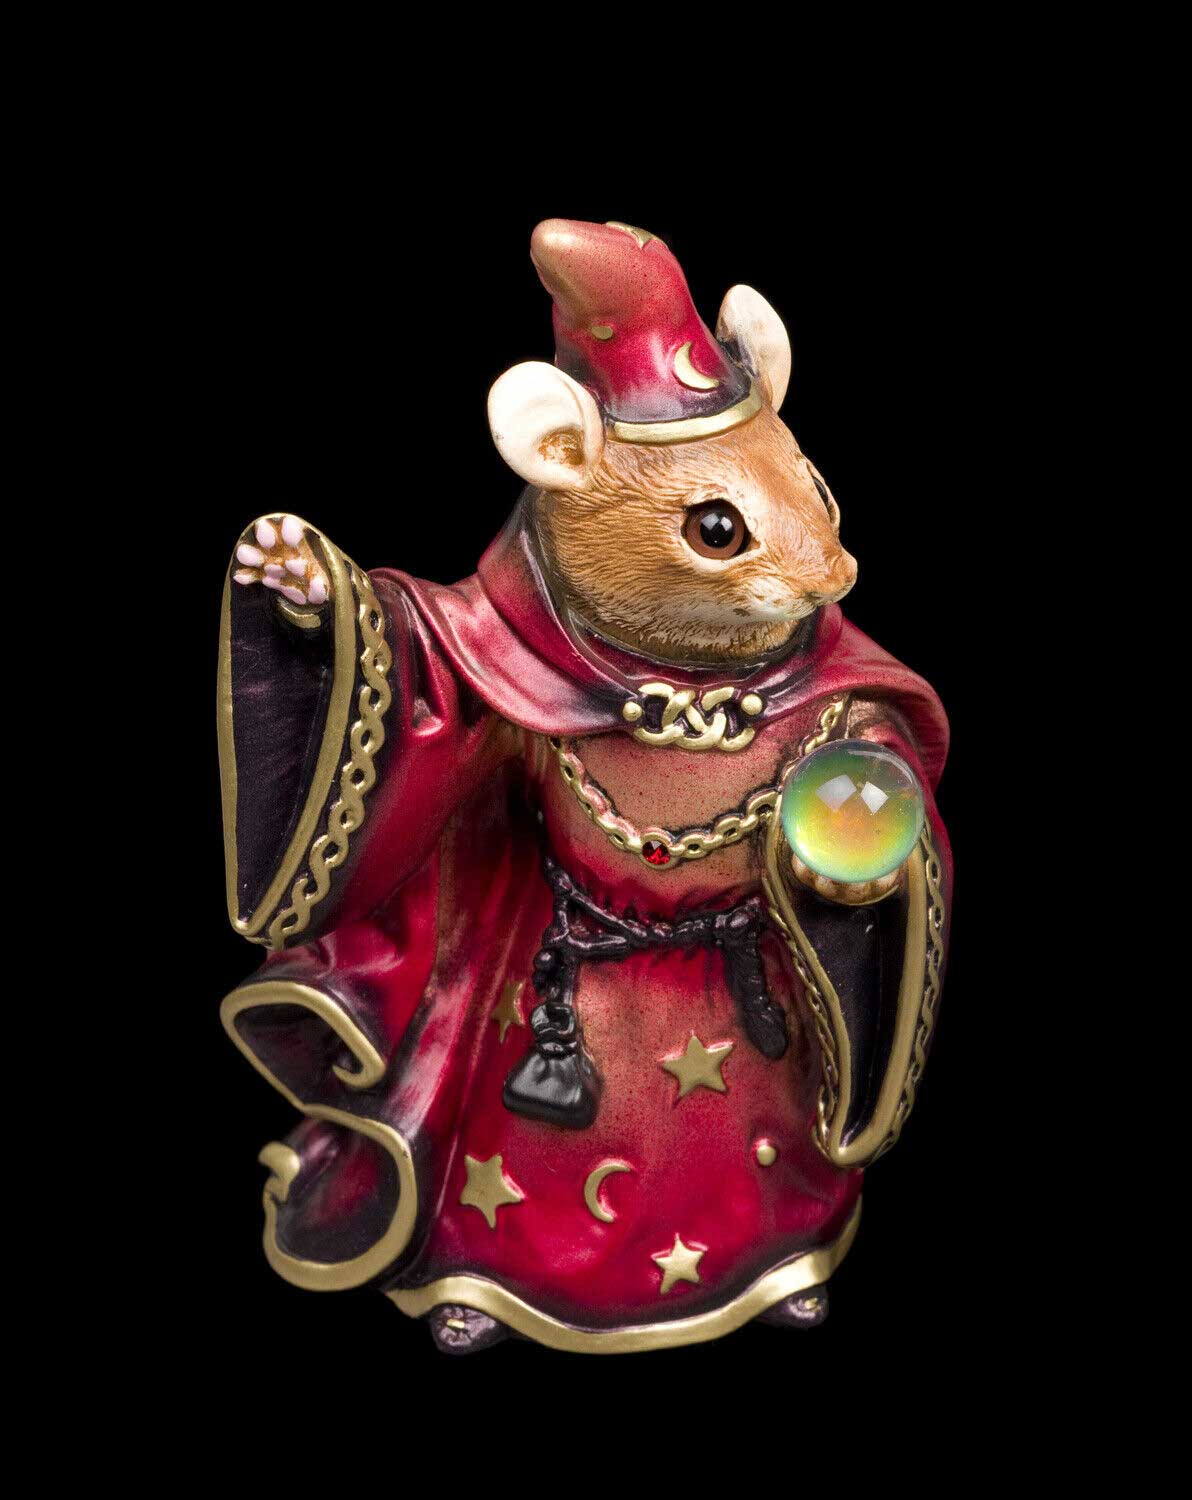 20220810-Twilight-Ruby-Mouse-Wizard-Test-Paint-1-by-Gina